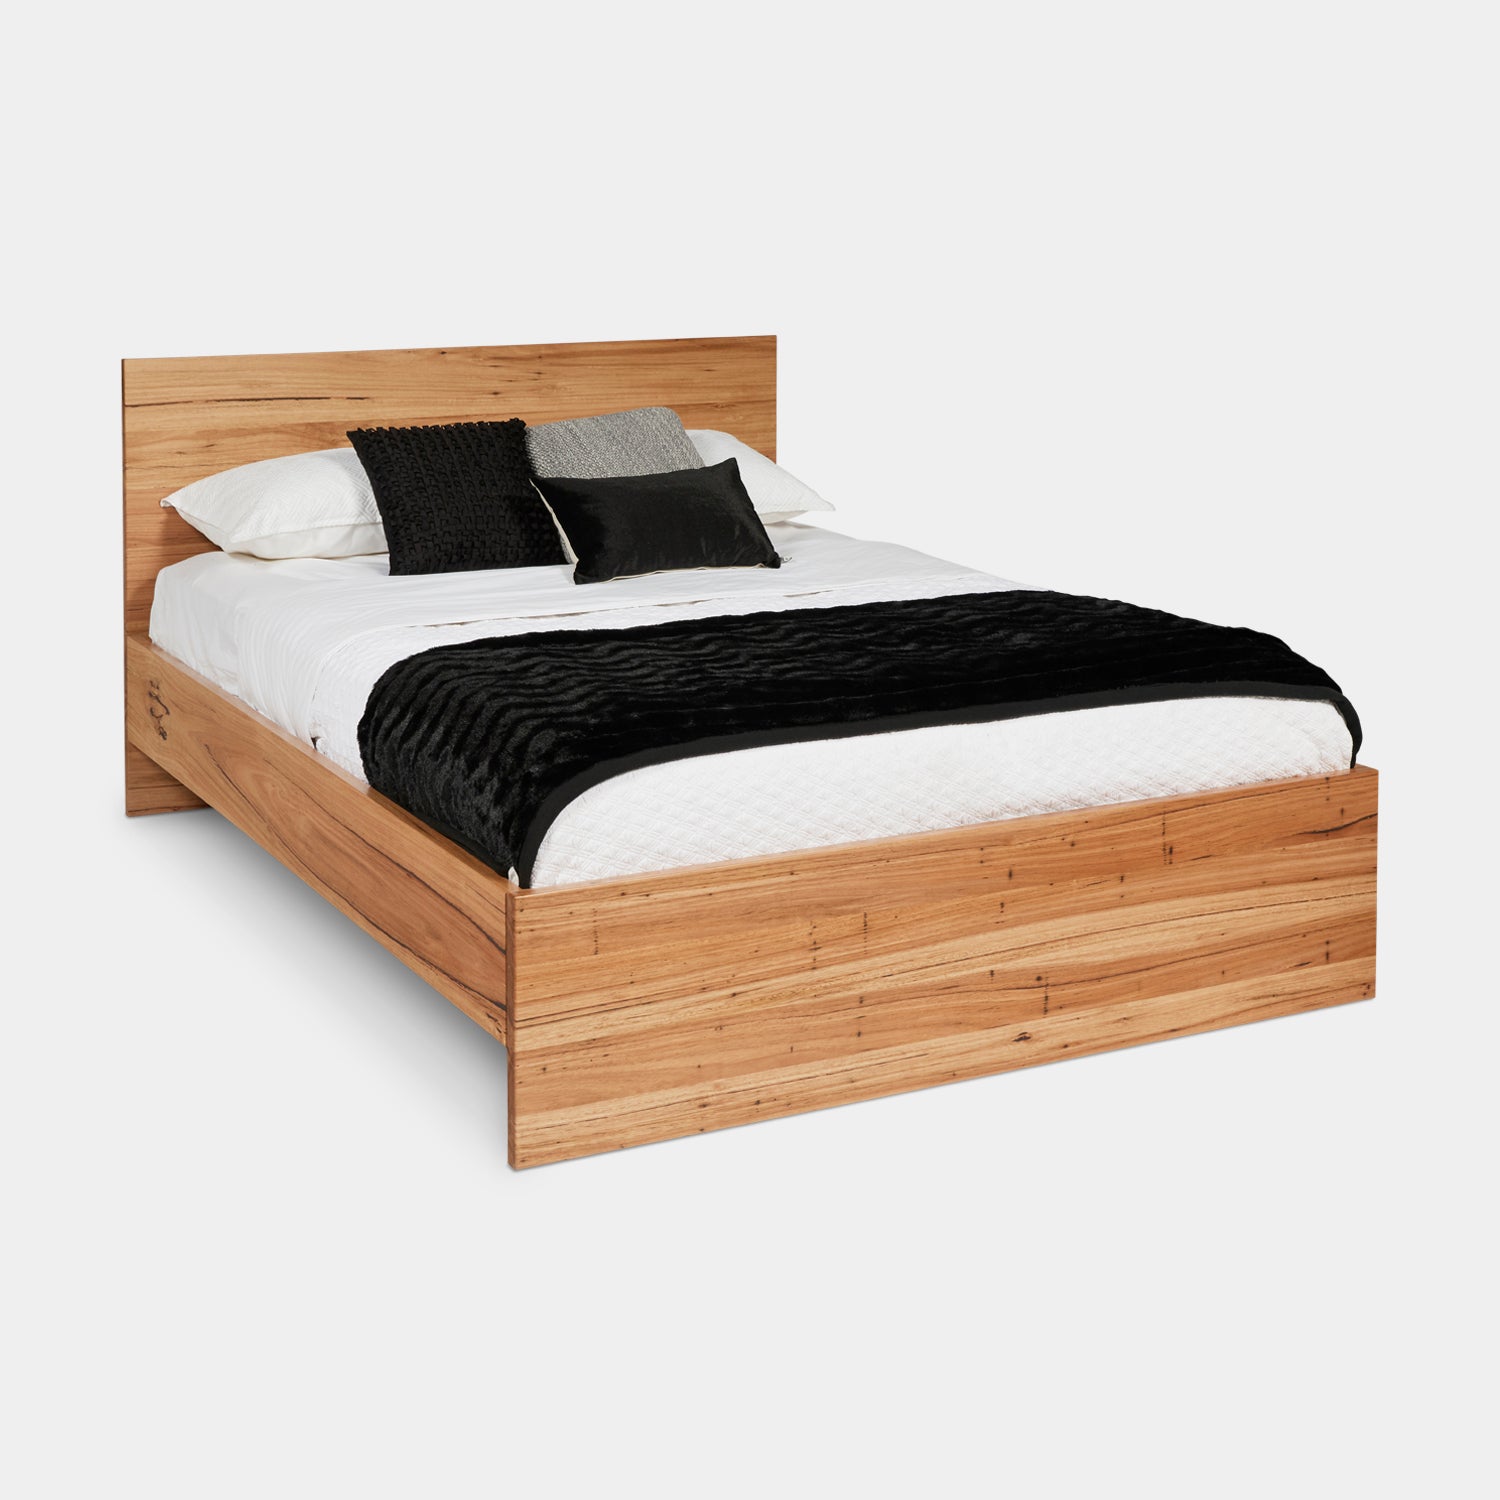 Contemporary-Timber-Queen-Bed-Brooklyn-r1